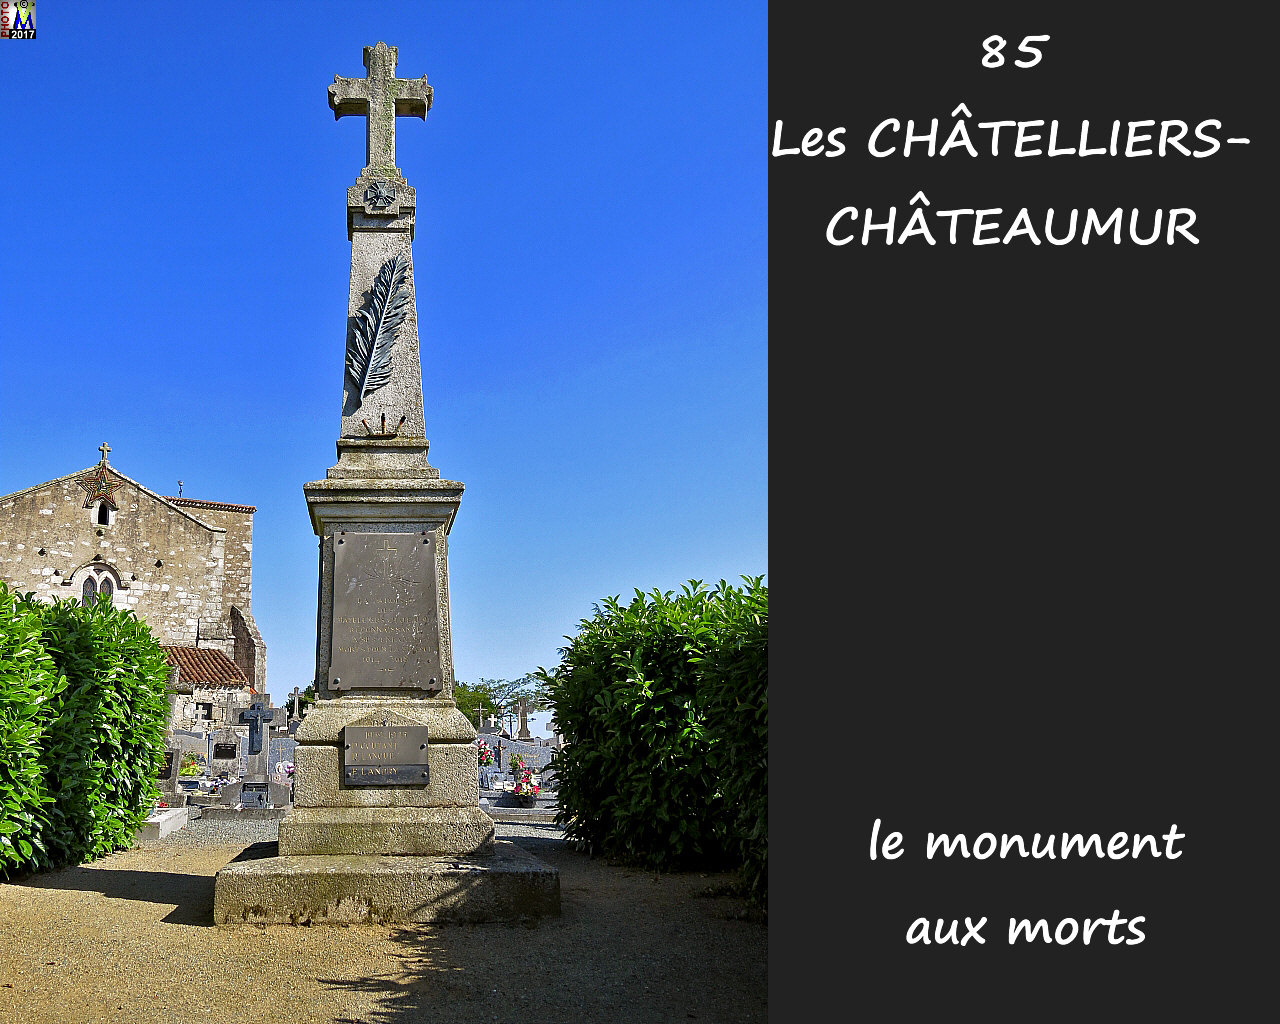 85CHATELLIERS-CHATEAUMUR_morts_1000.jpg